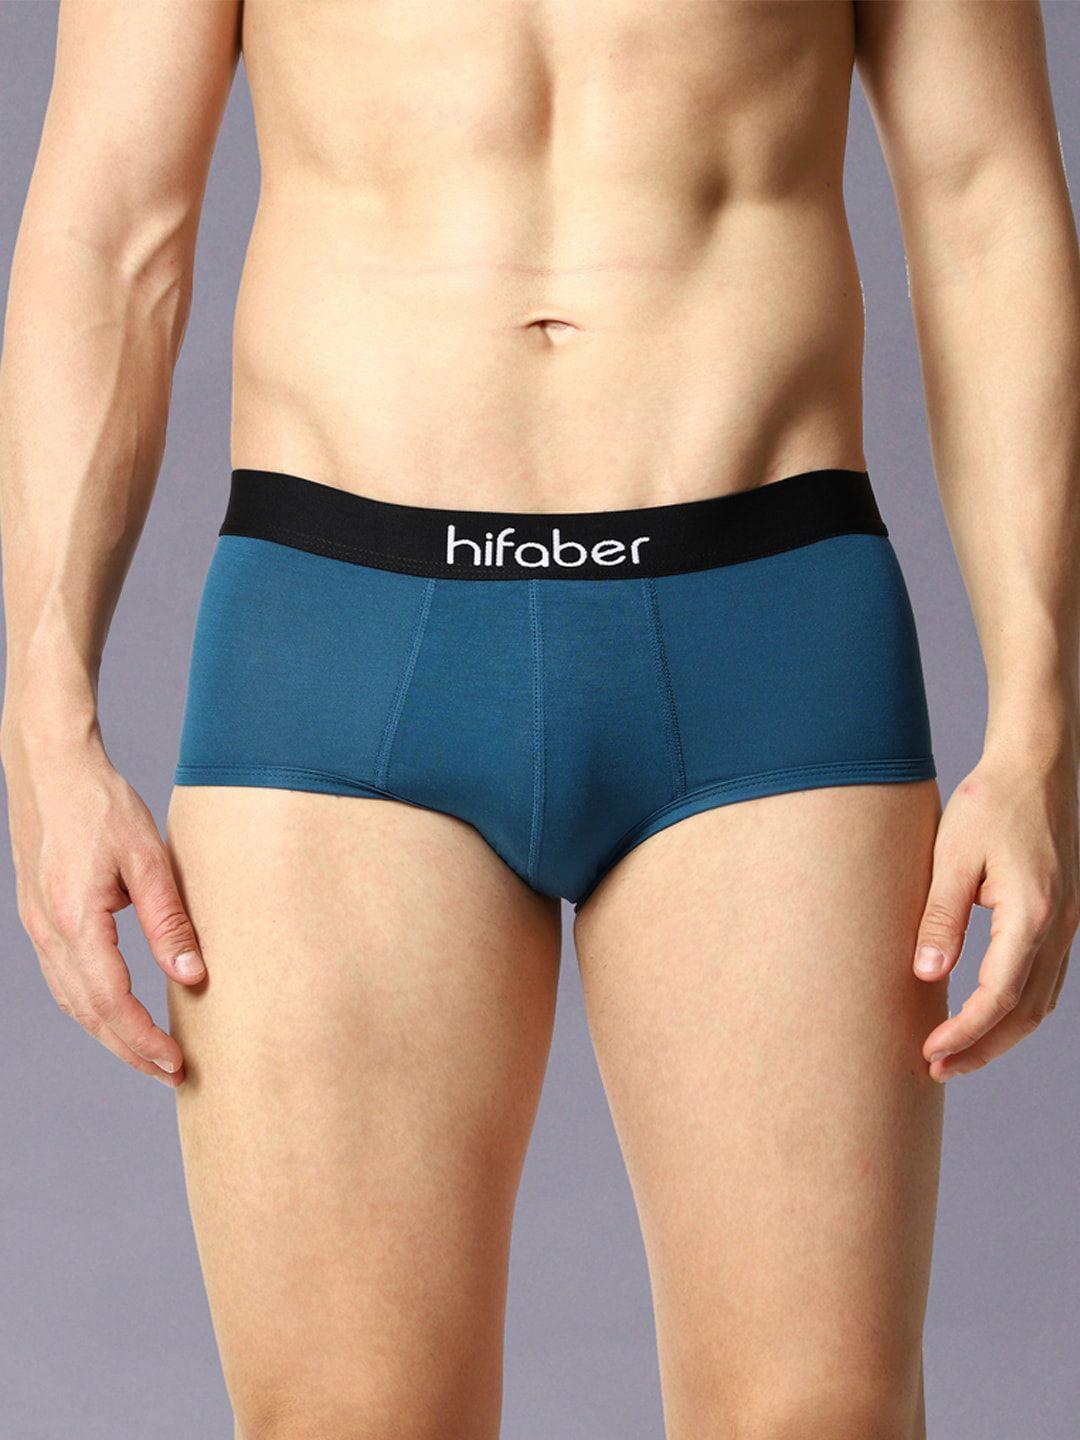 hifaber-men-anti-bacterial-hipster-briefs-h0670_s